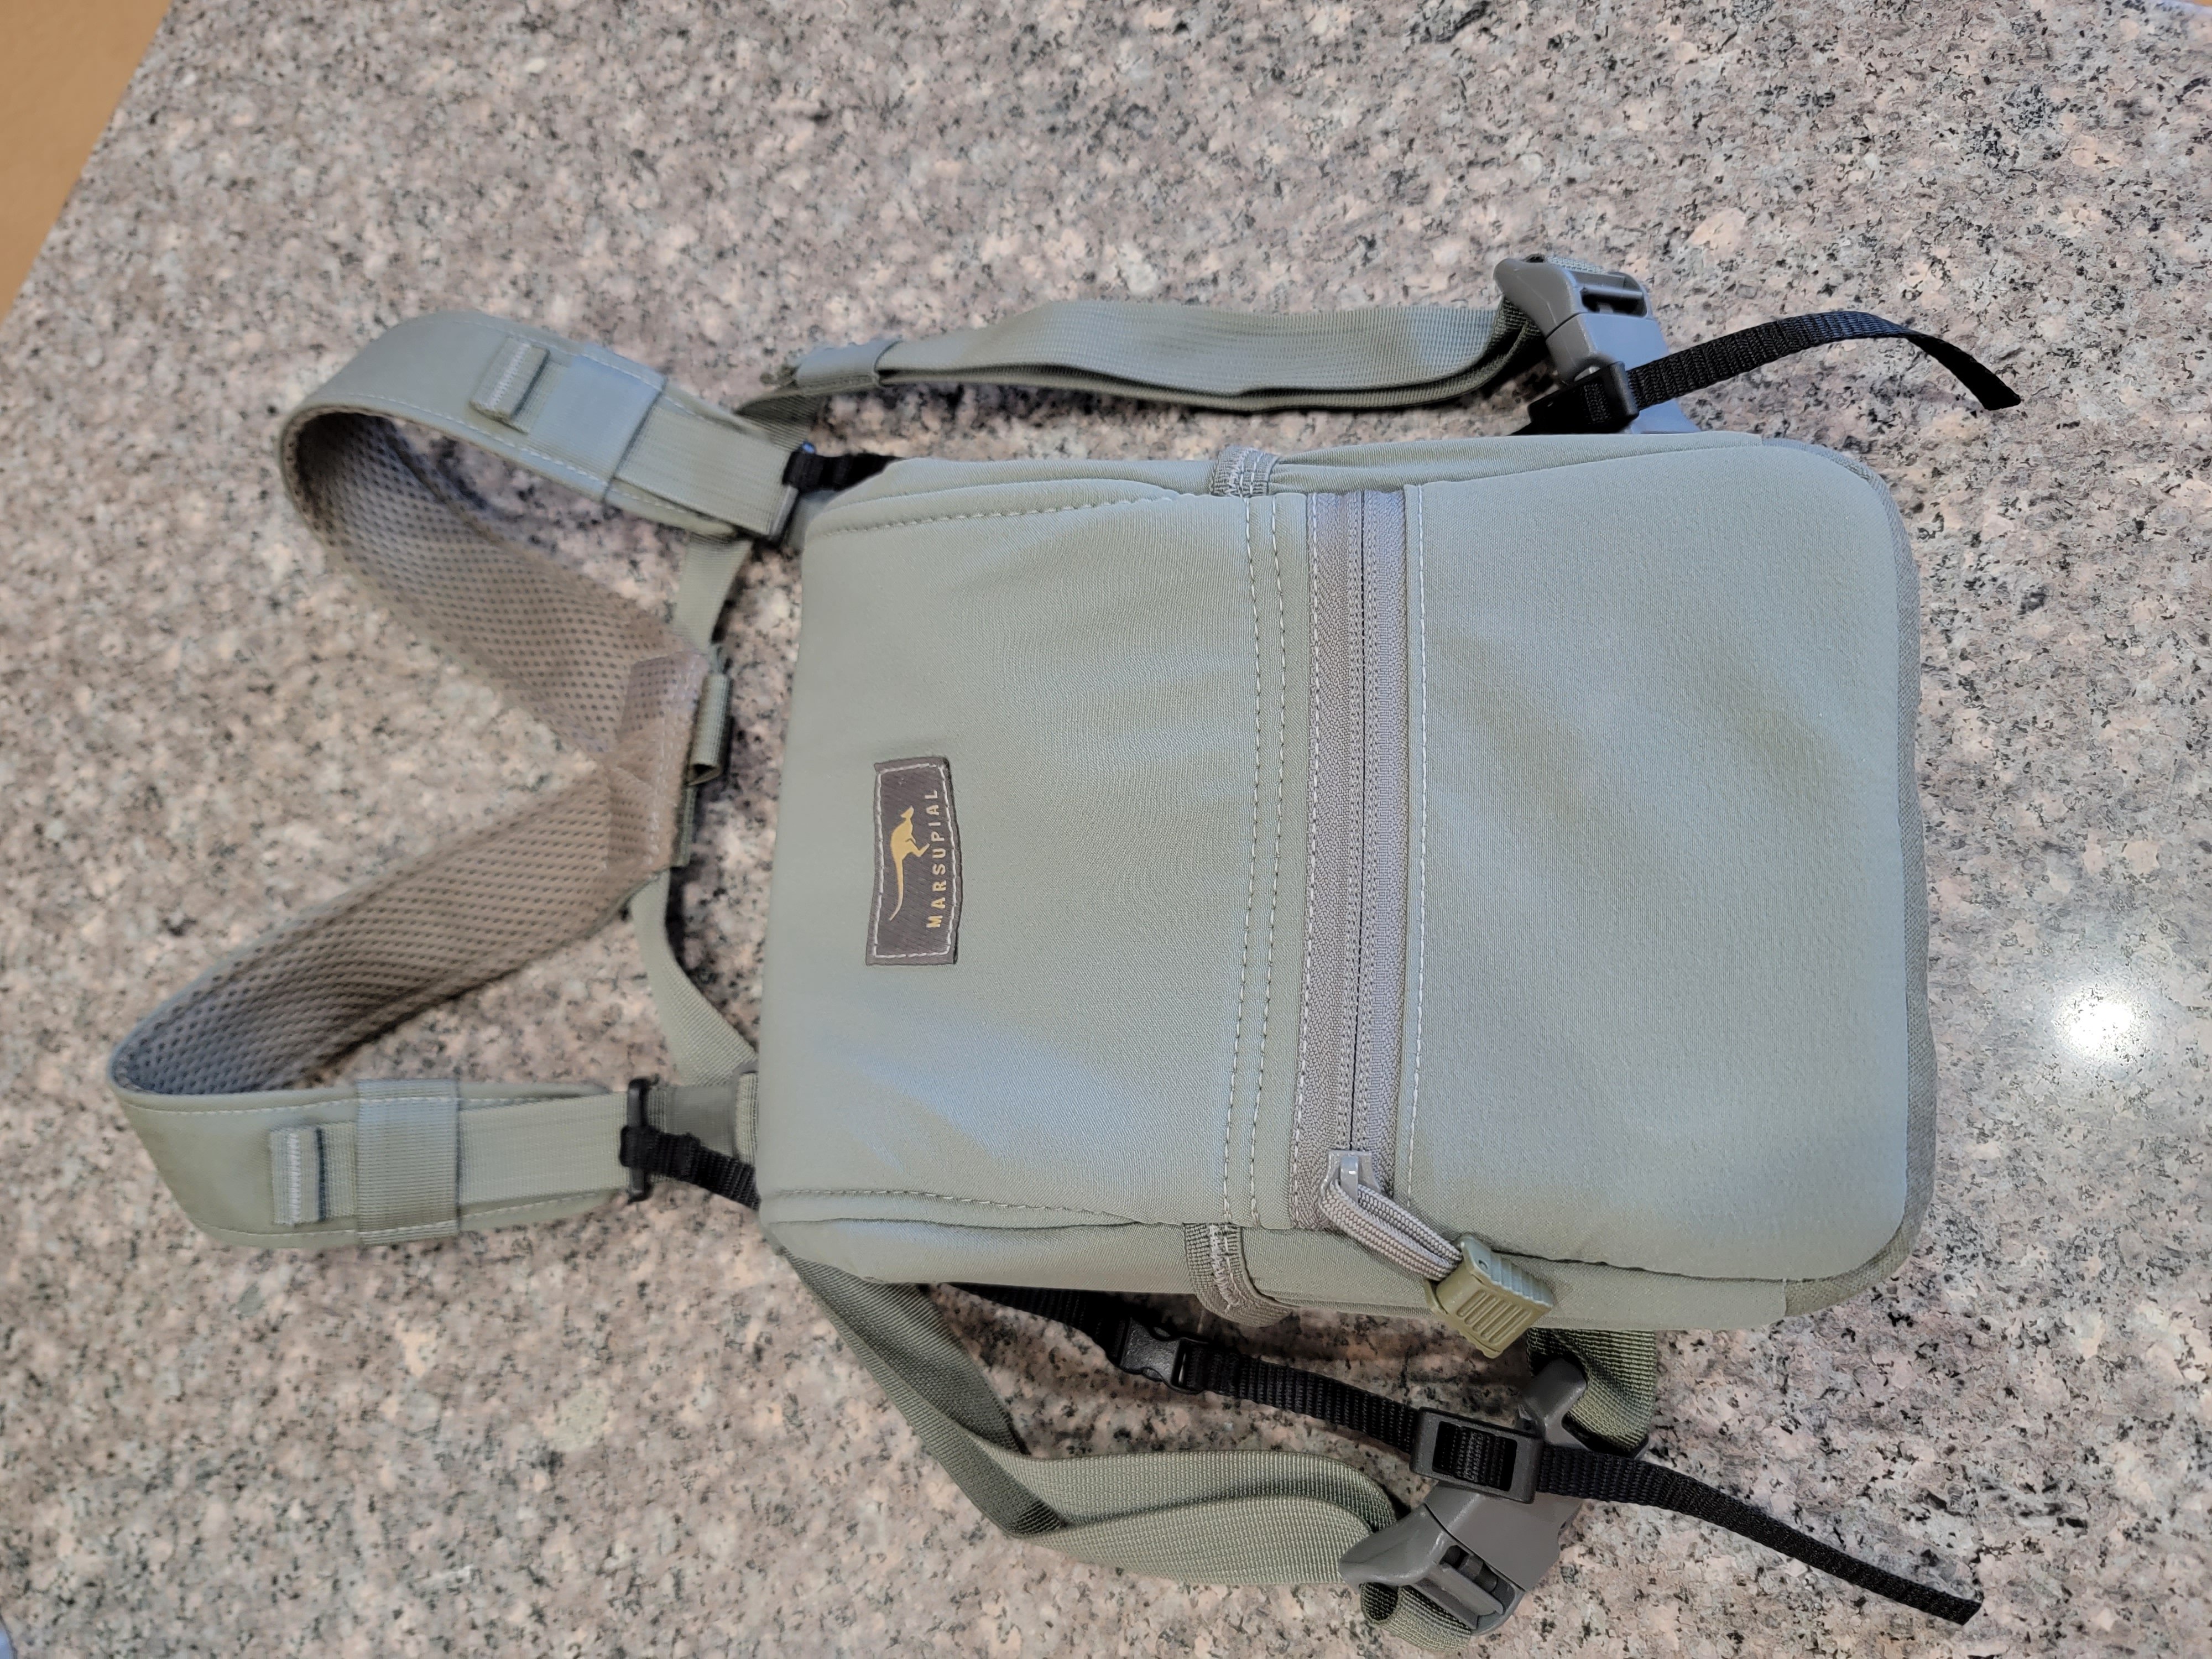 WTS: Marsupial Gear Fully Enclosed Binocular Harness - Large - Classified  Ads -  Discussion forum